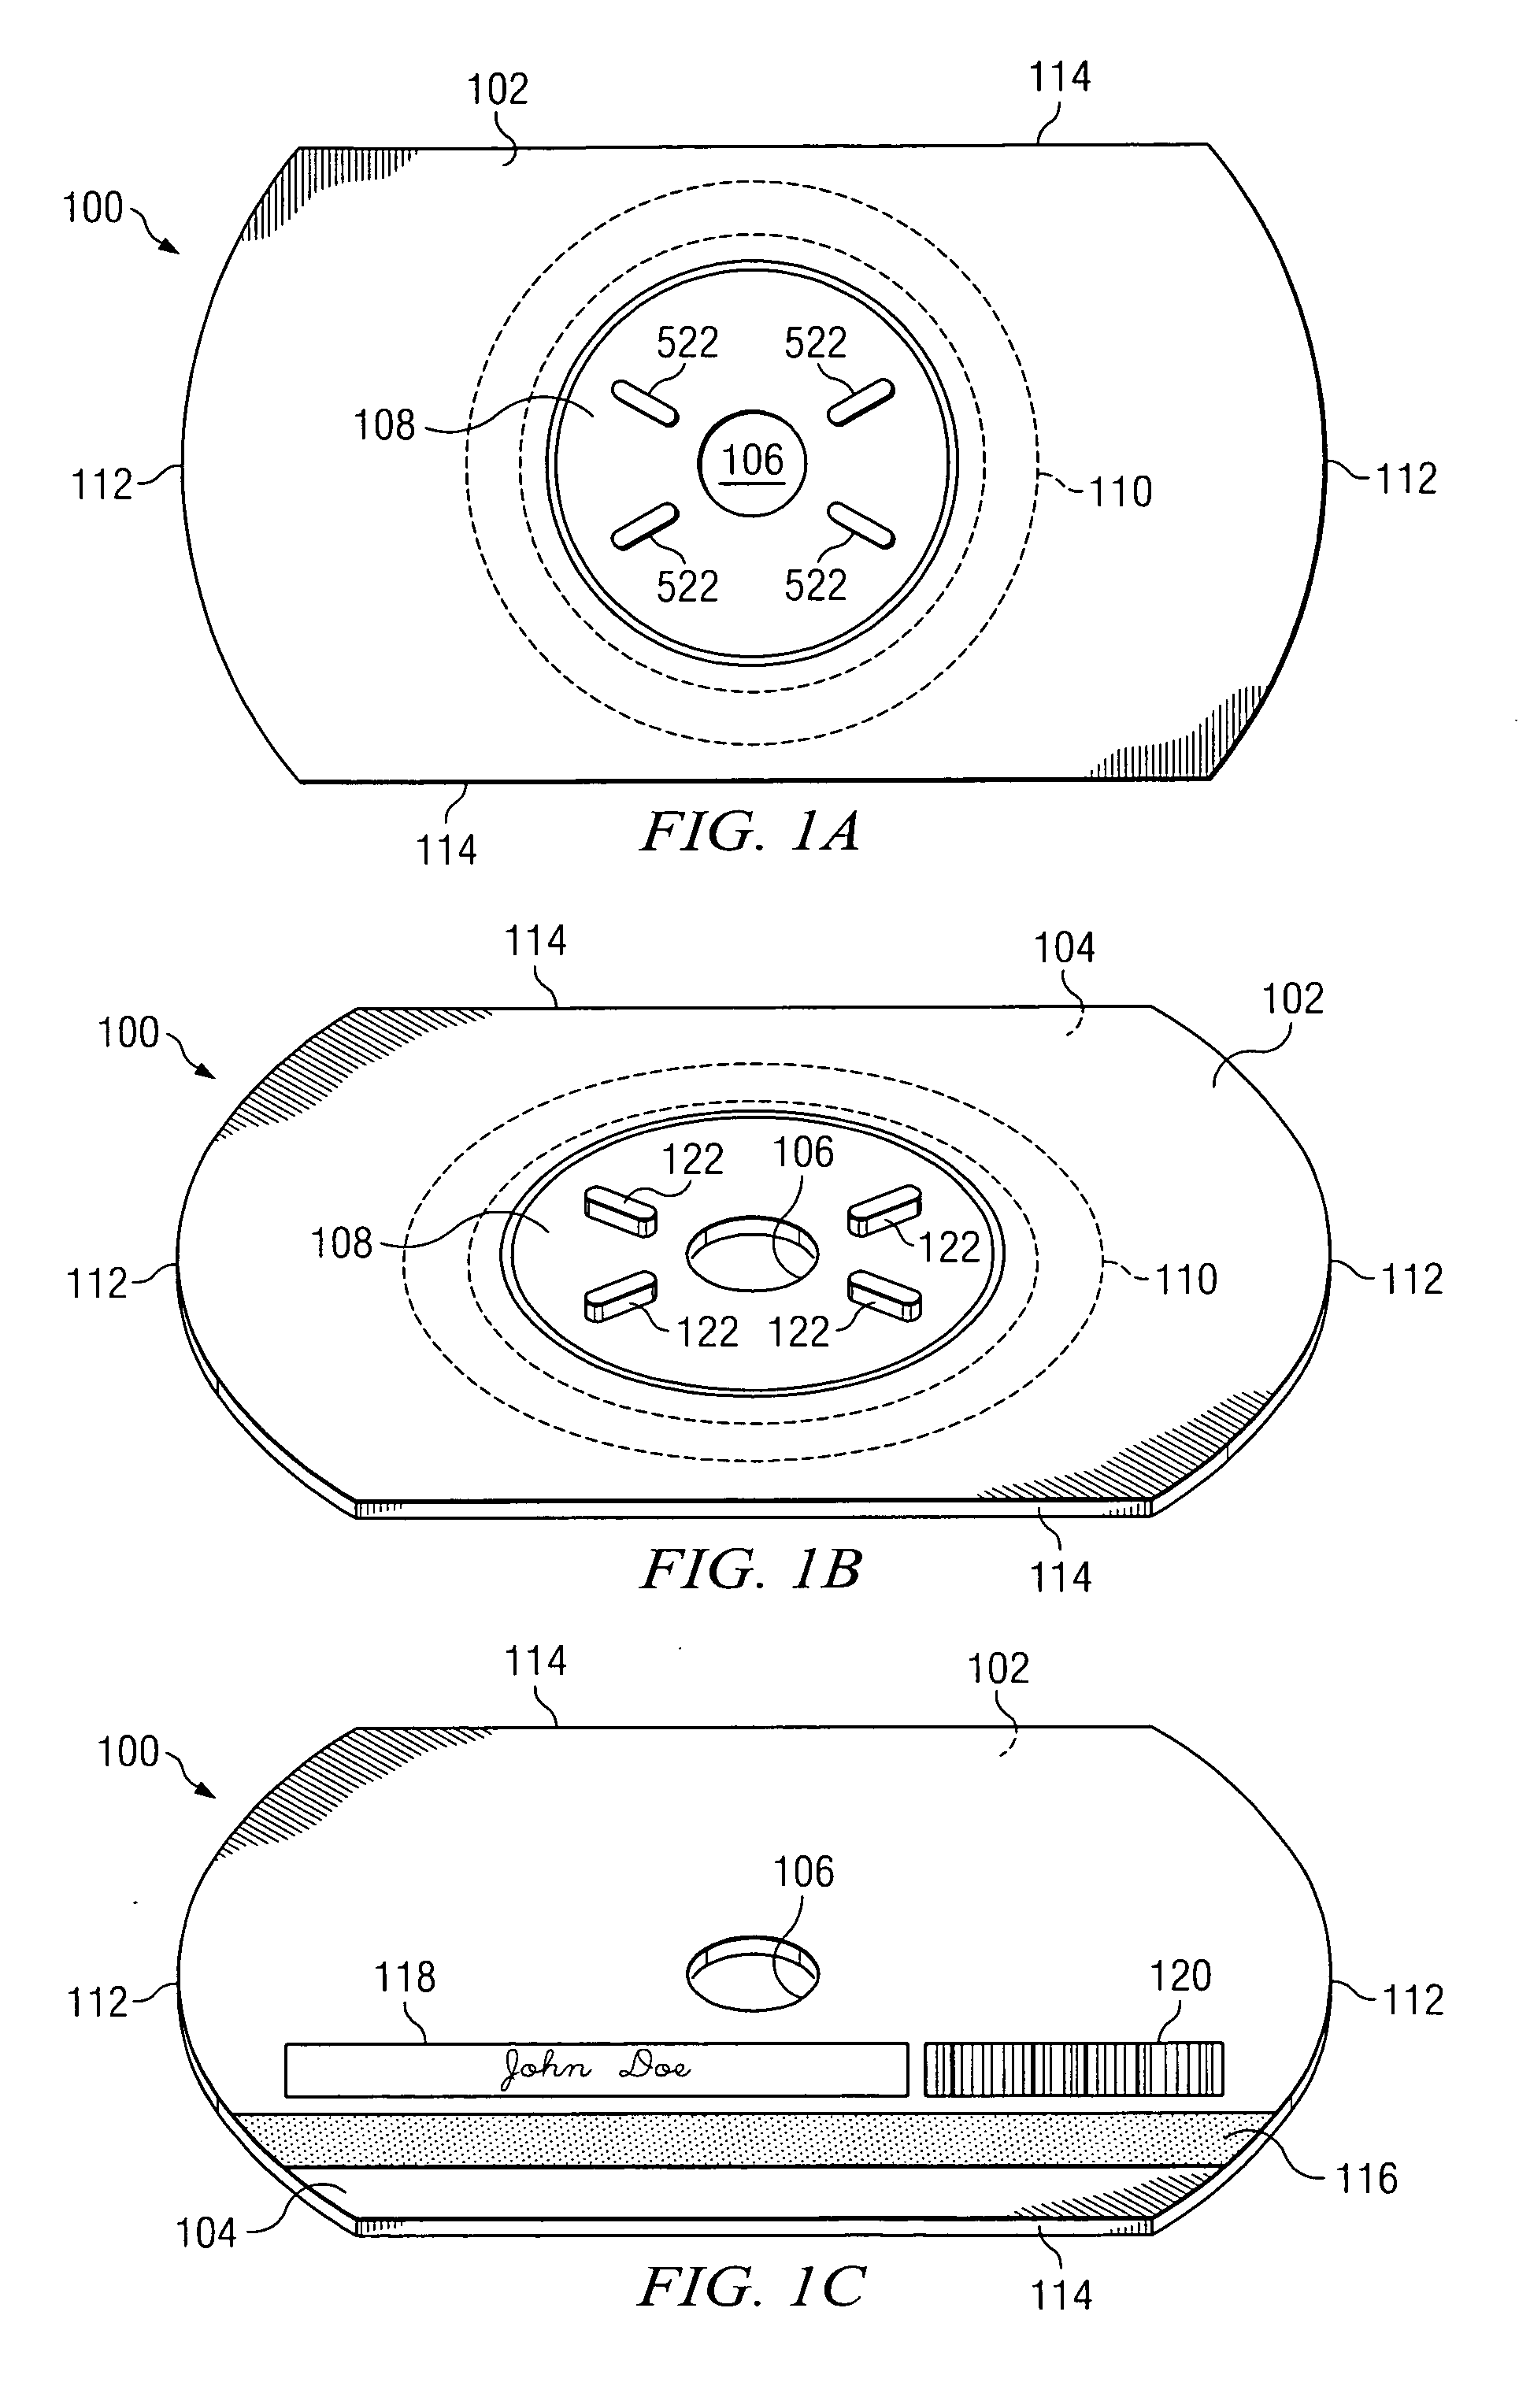 Optical disc having a reduced planar thickness